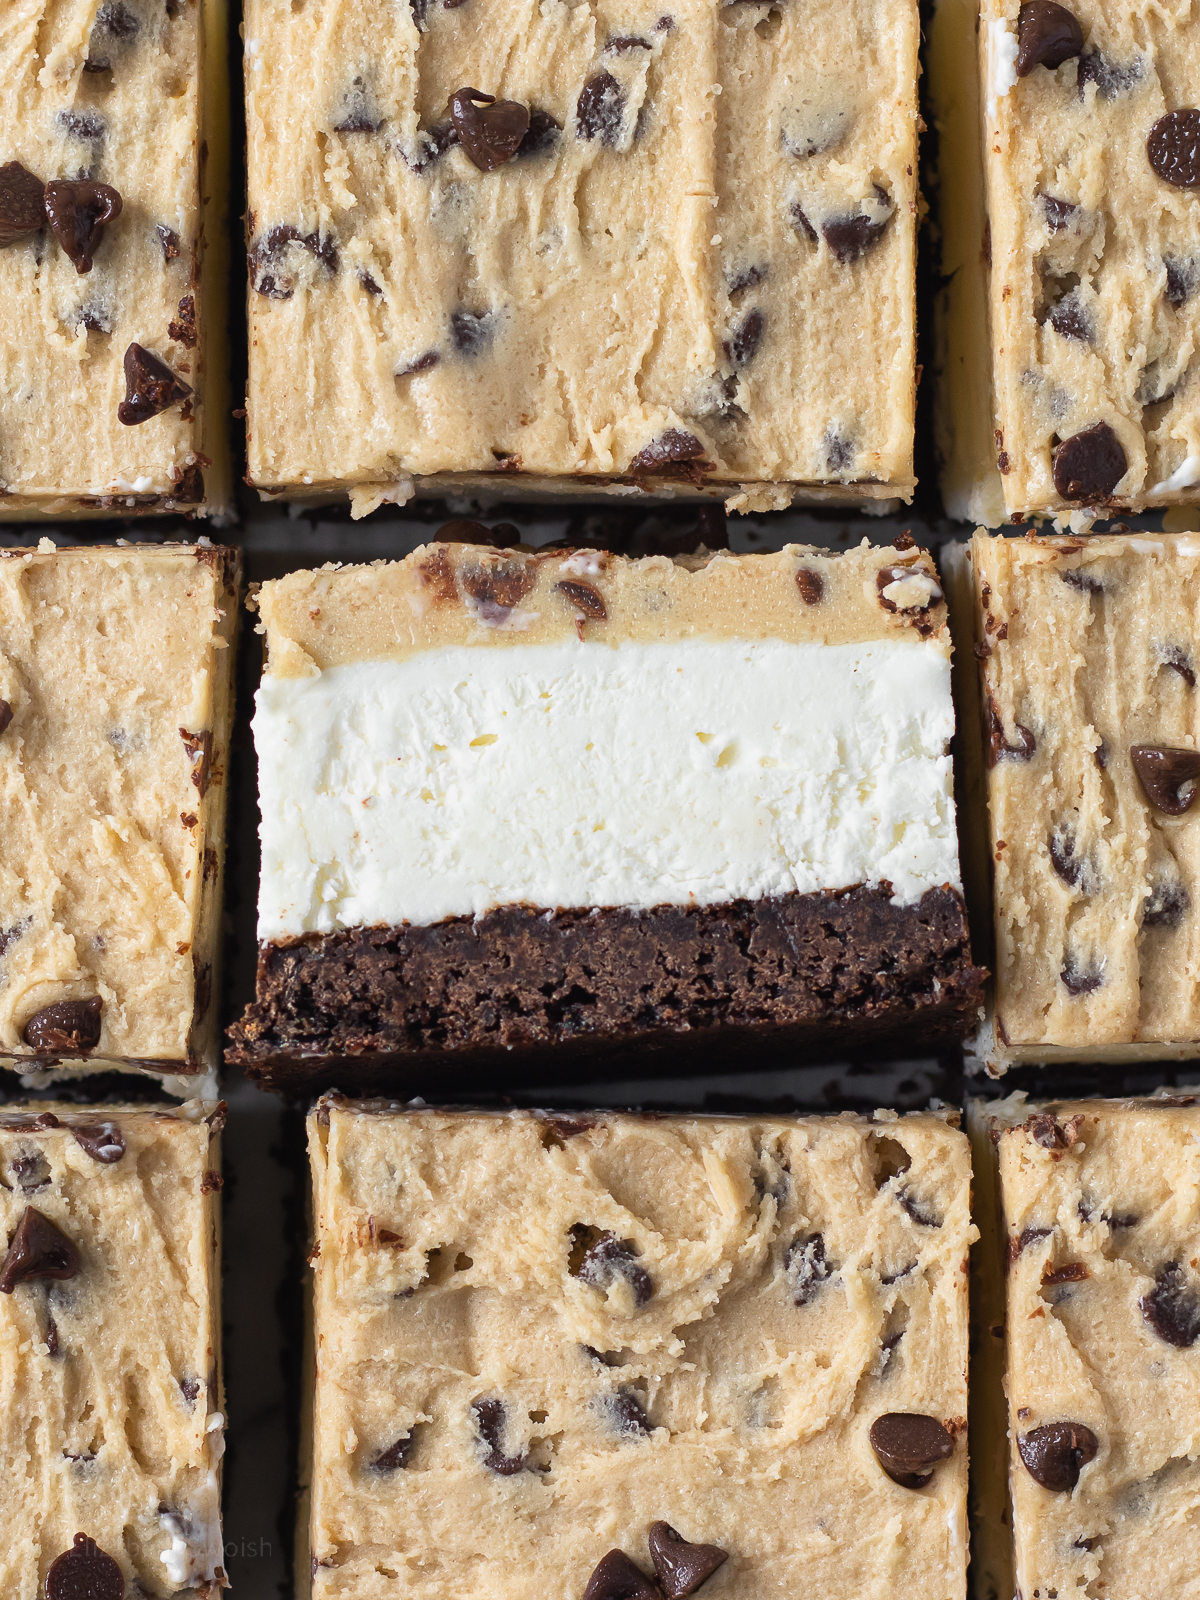 Brownie Cookie Cheesecake Bar flipped on its side to see bottom brownie layer, middle no bake cheesecake, and top edible chocolate chip cookie dough.